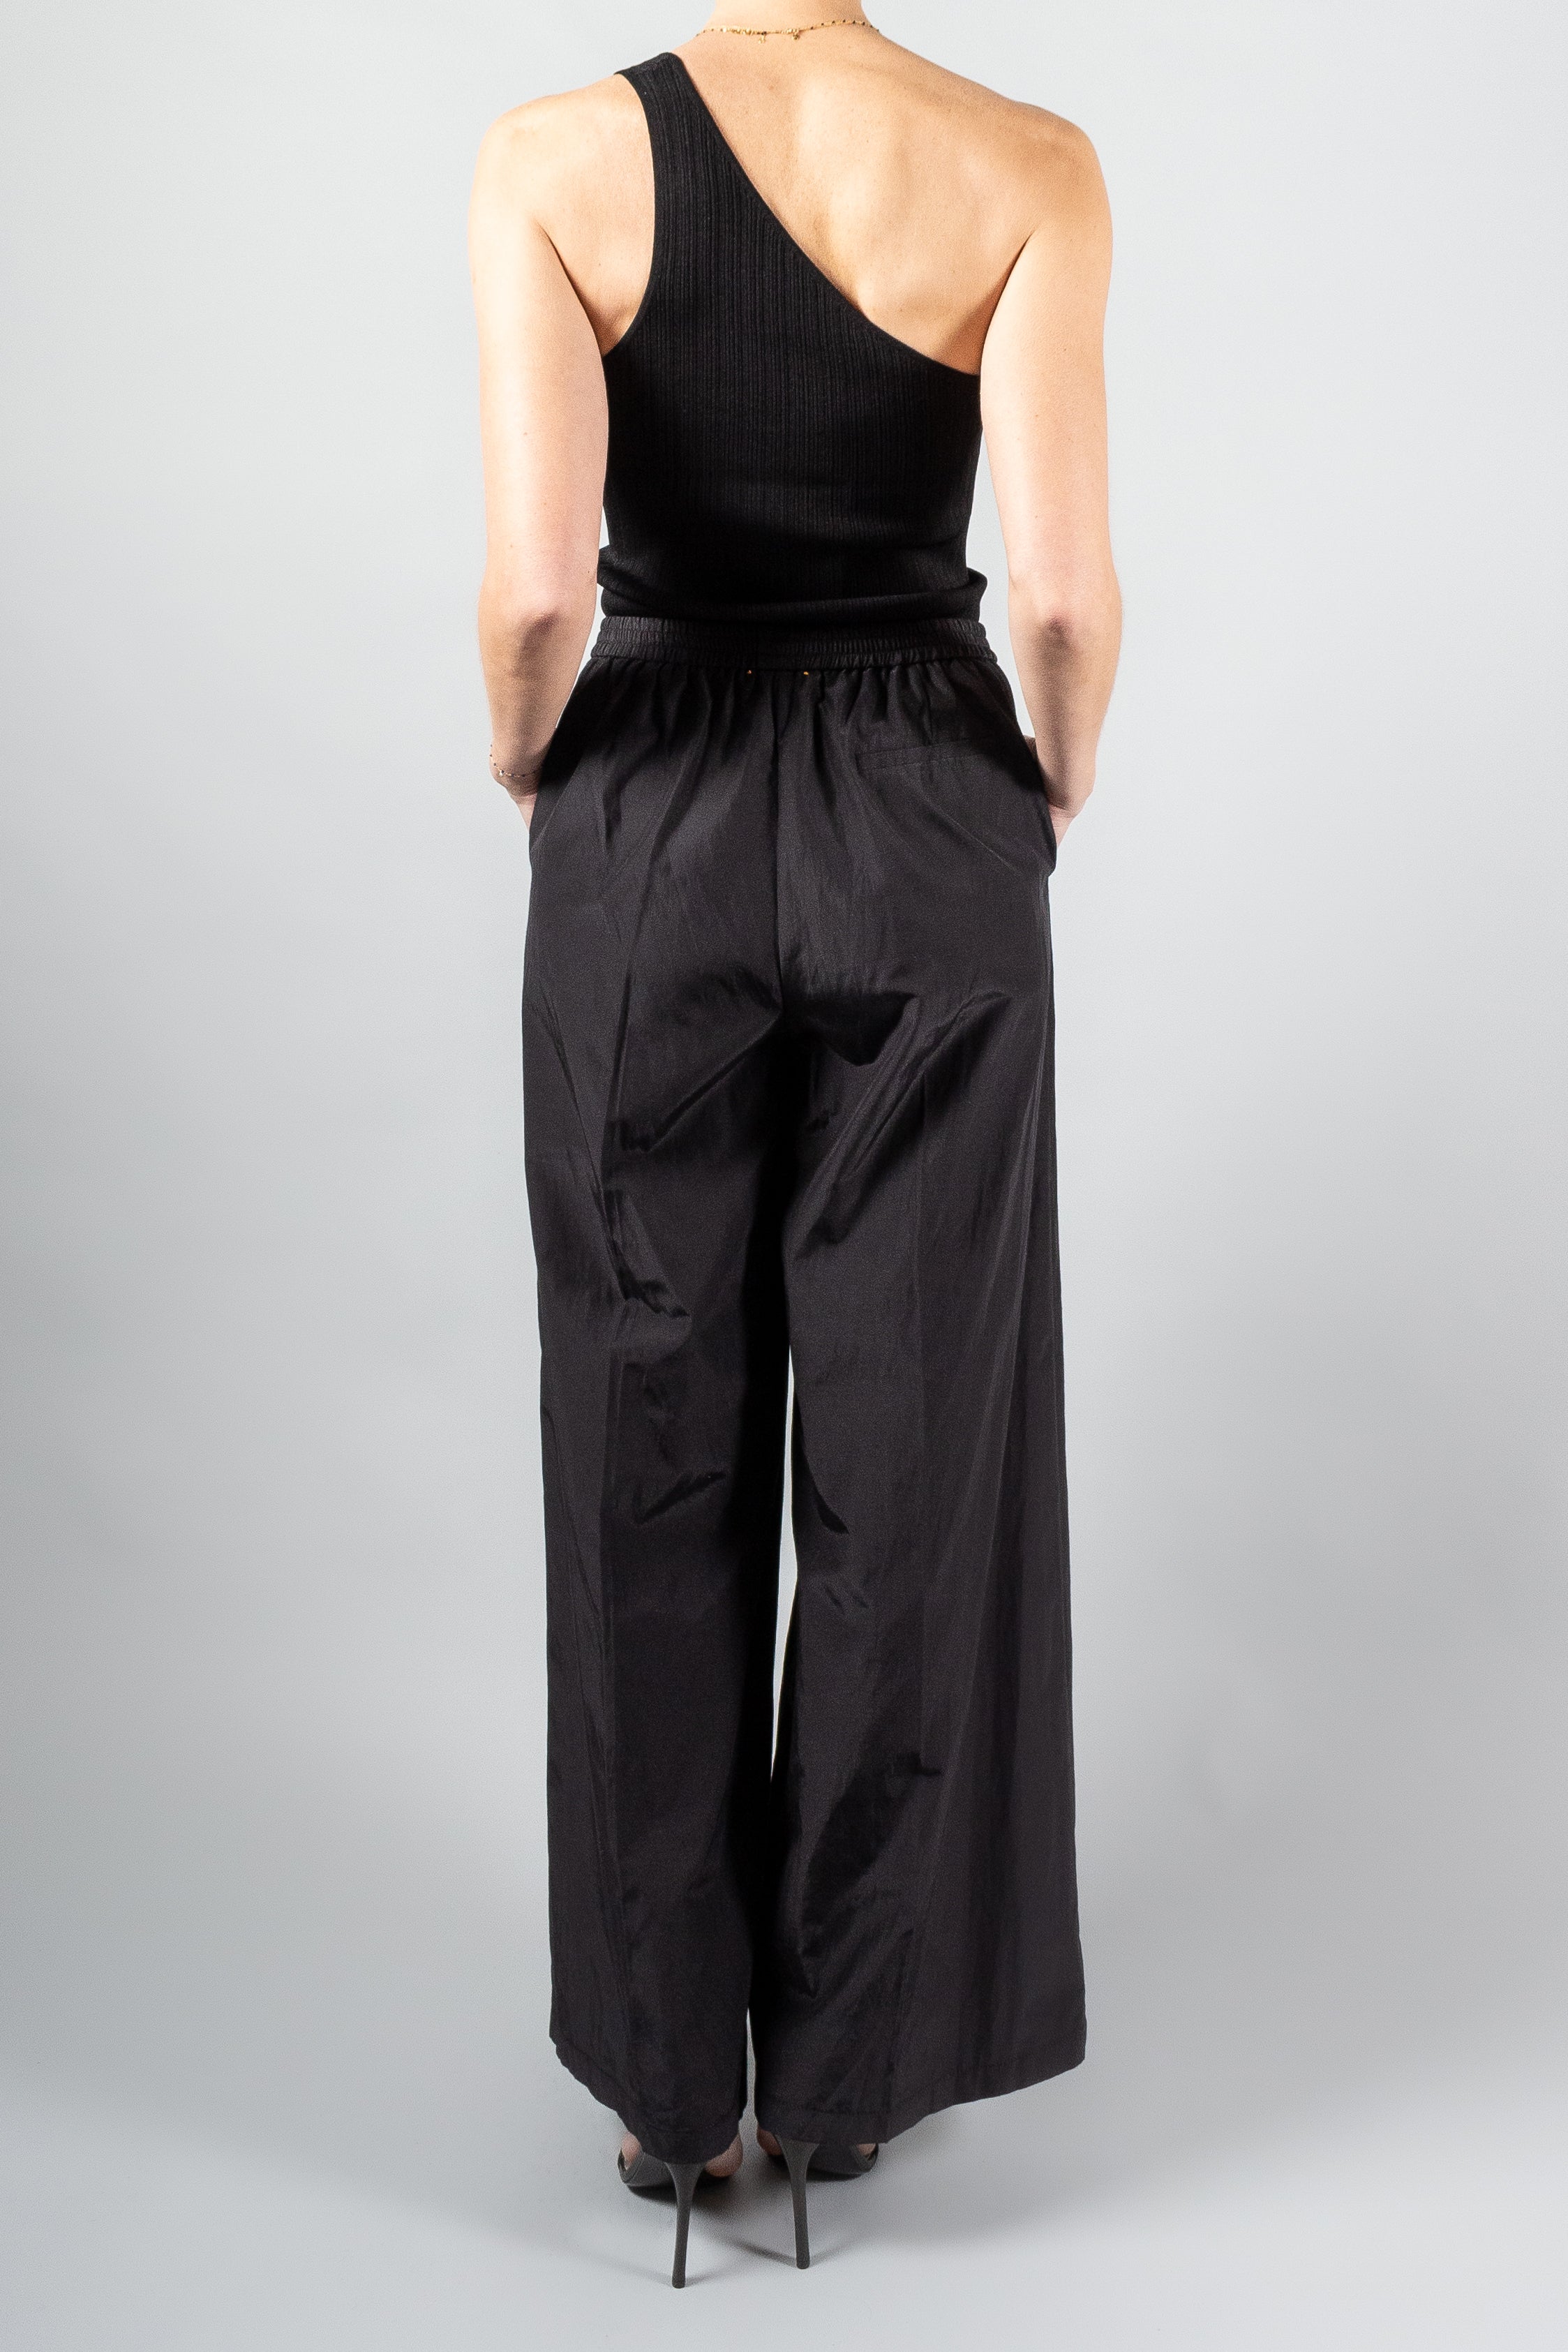 Forte Forte Chic Taffettas Palazzo Pants-Pants and Shorts-Misch-Boutique-Vancouver-Canada-misch.ca